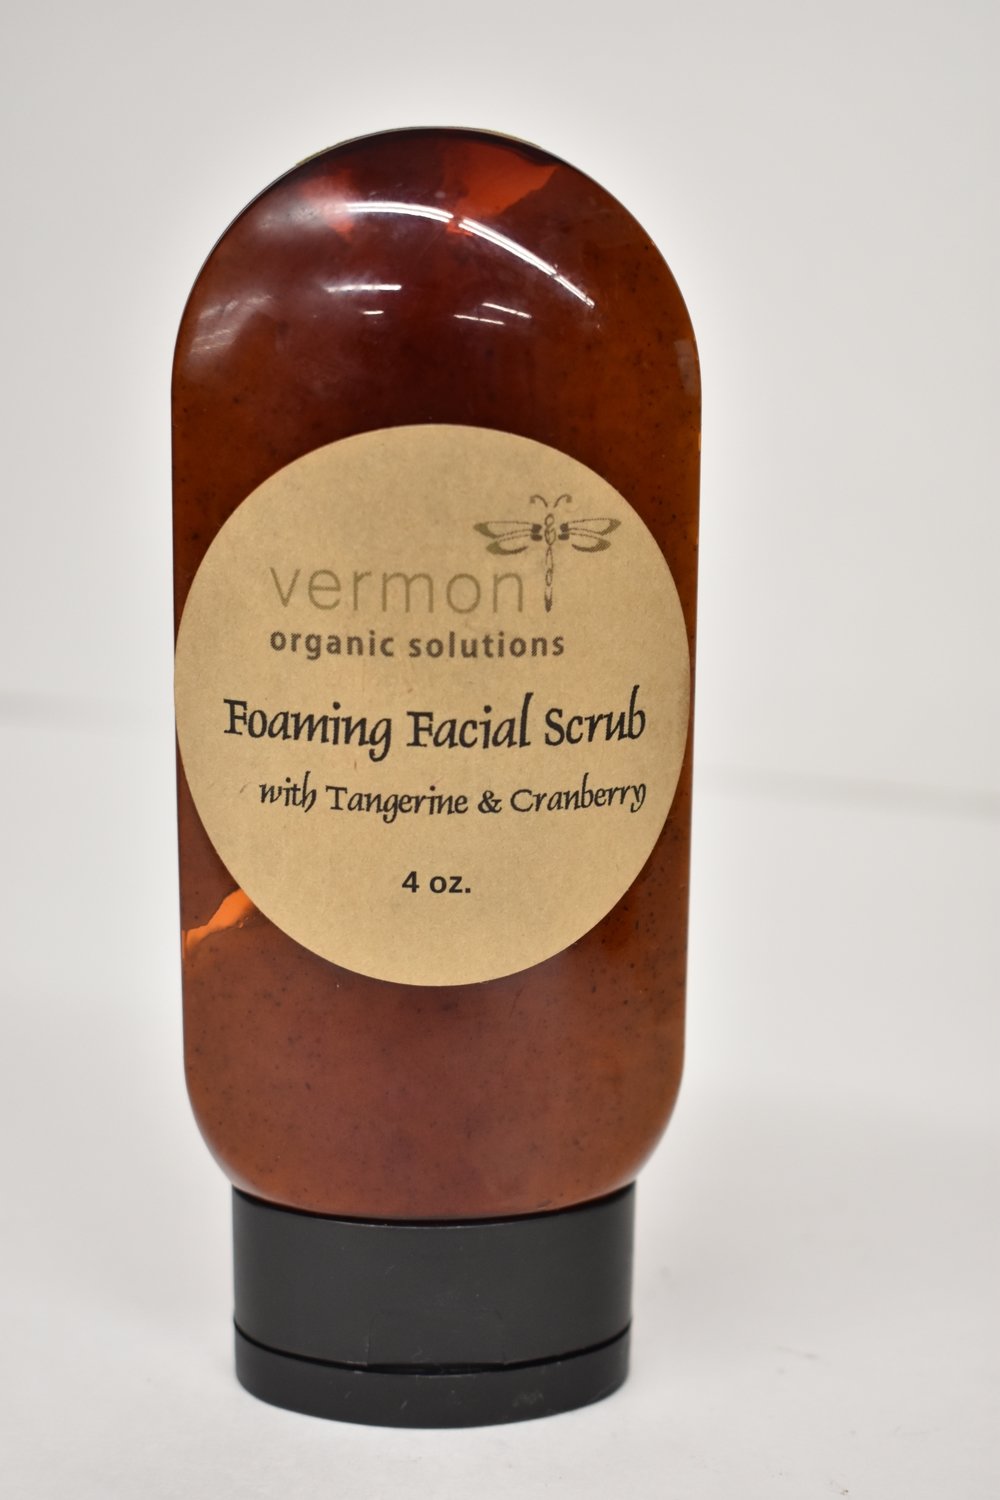 Vermont Organic Foaming Facial Scrub with Tangerine and Cranberry